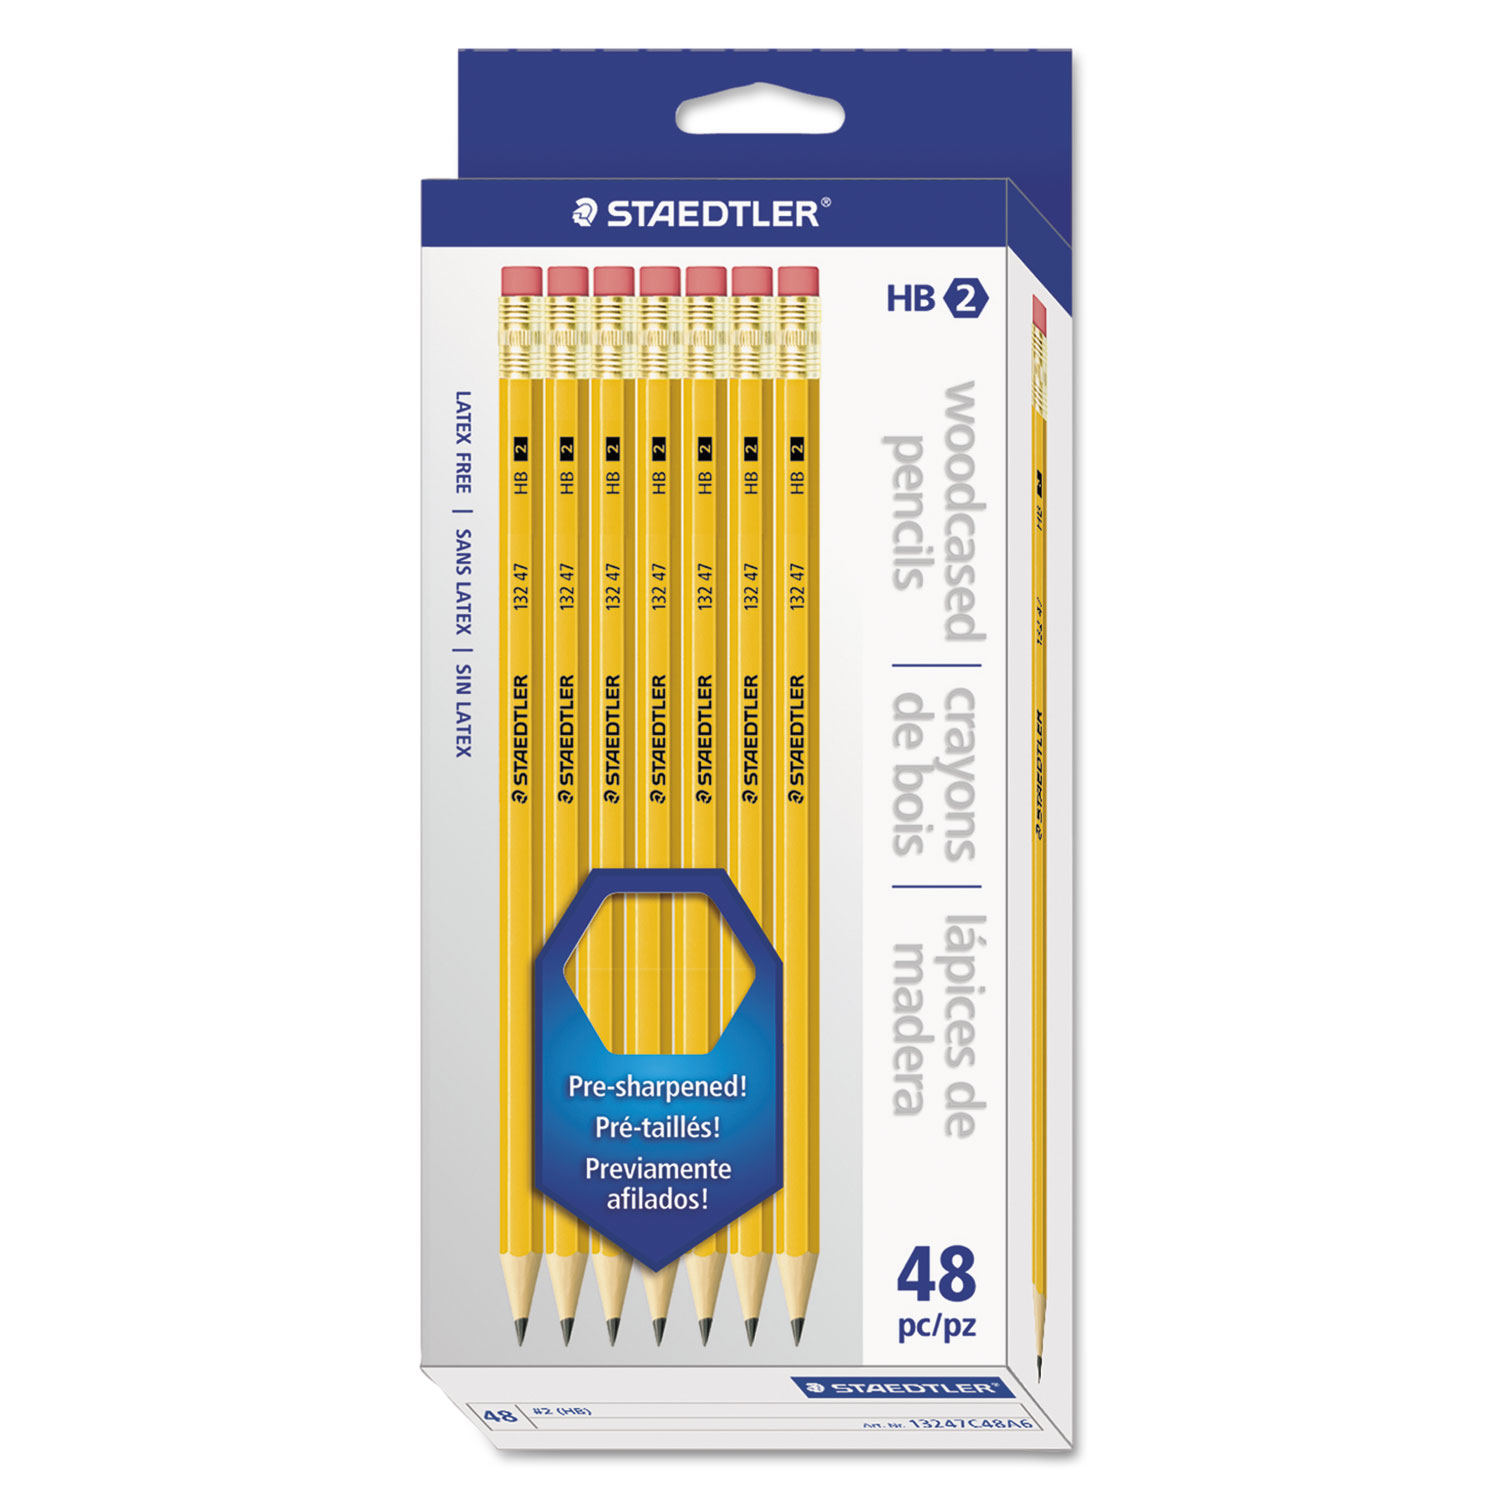  Staedtler 13247C48A6  TH Woodcase Pencil, HB (#2.5), Black Lead, Yellow Barrel, 48/Pack (STD13247C48A6) 